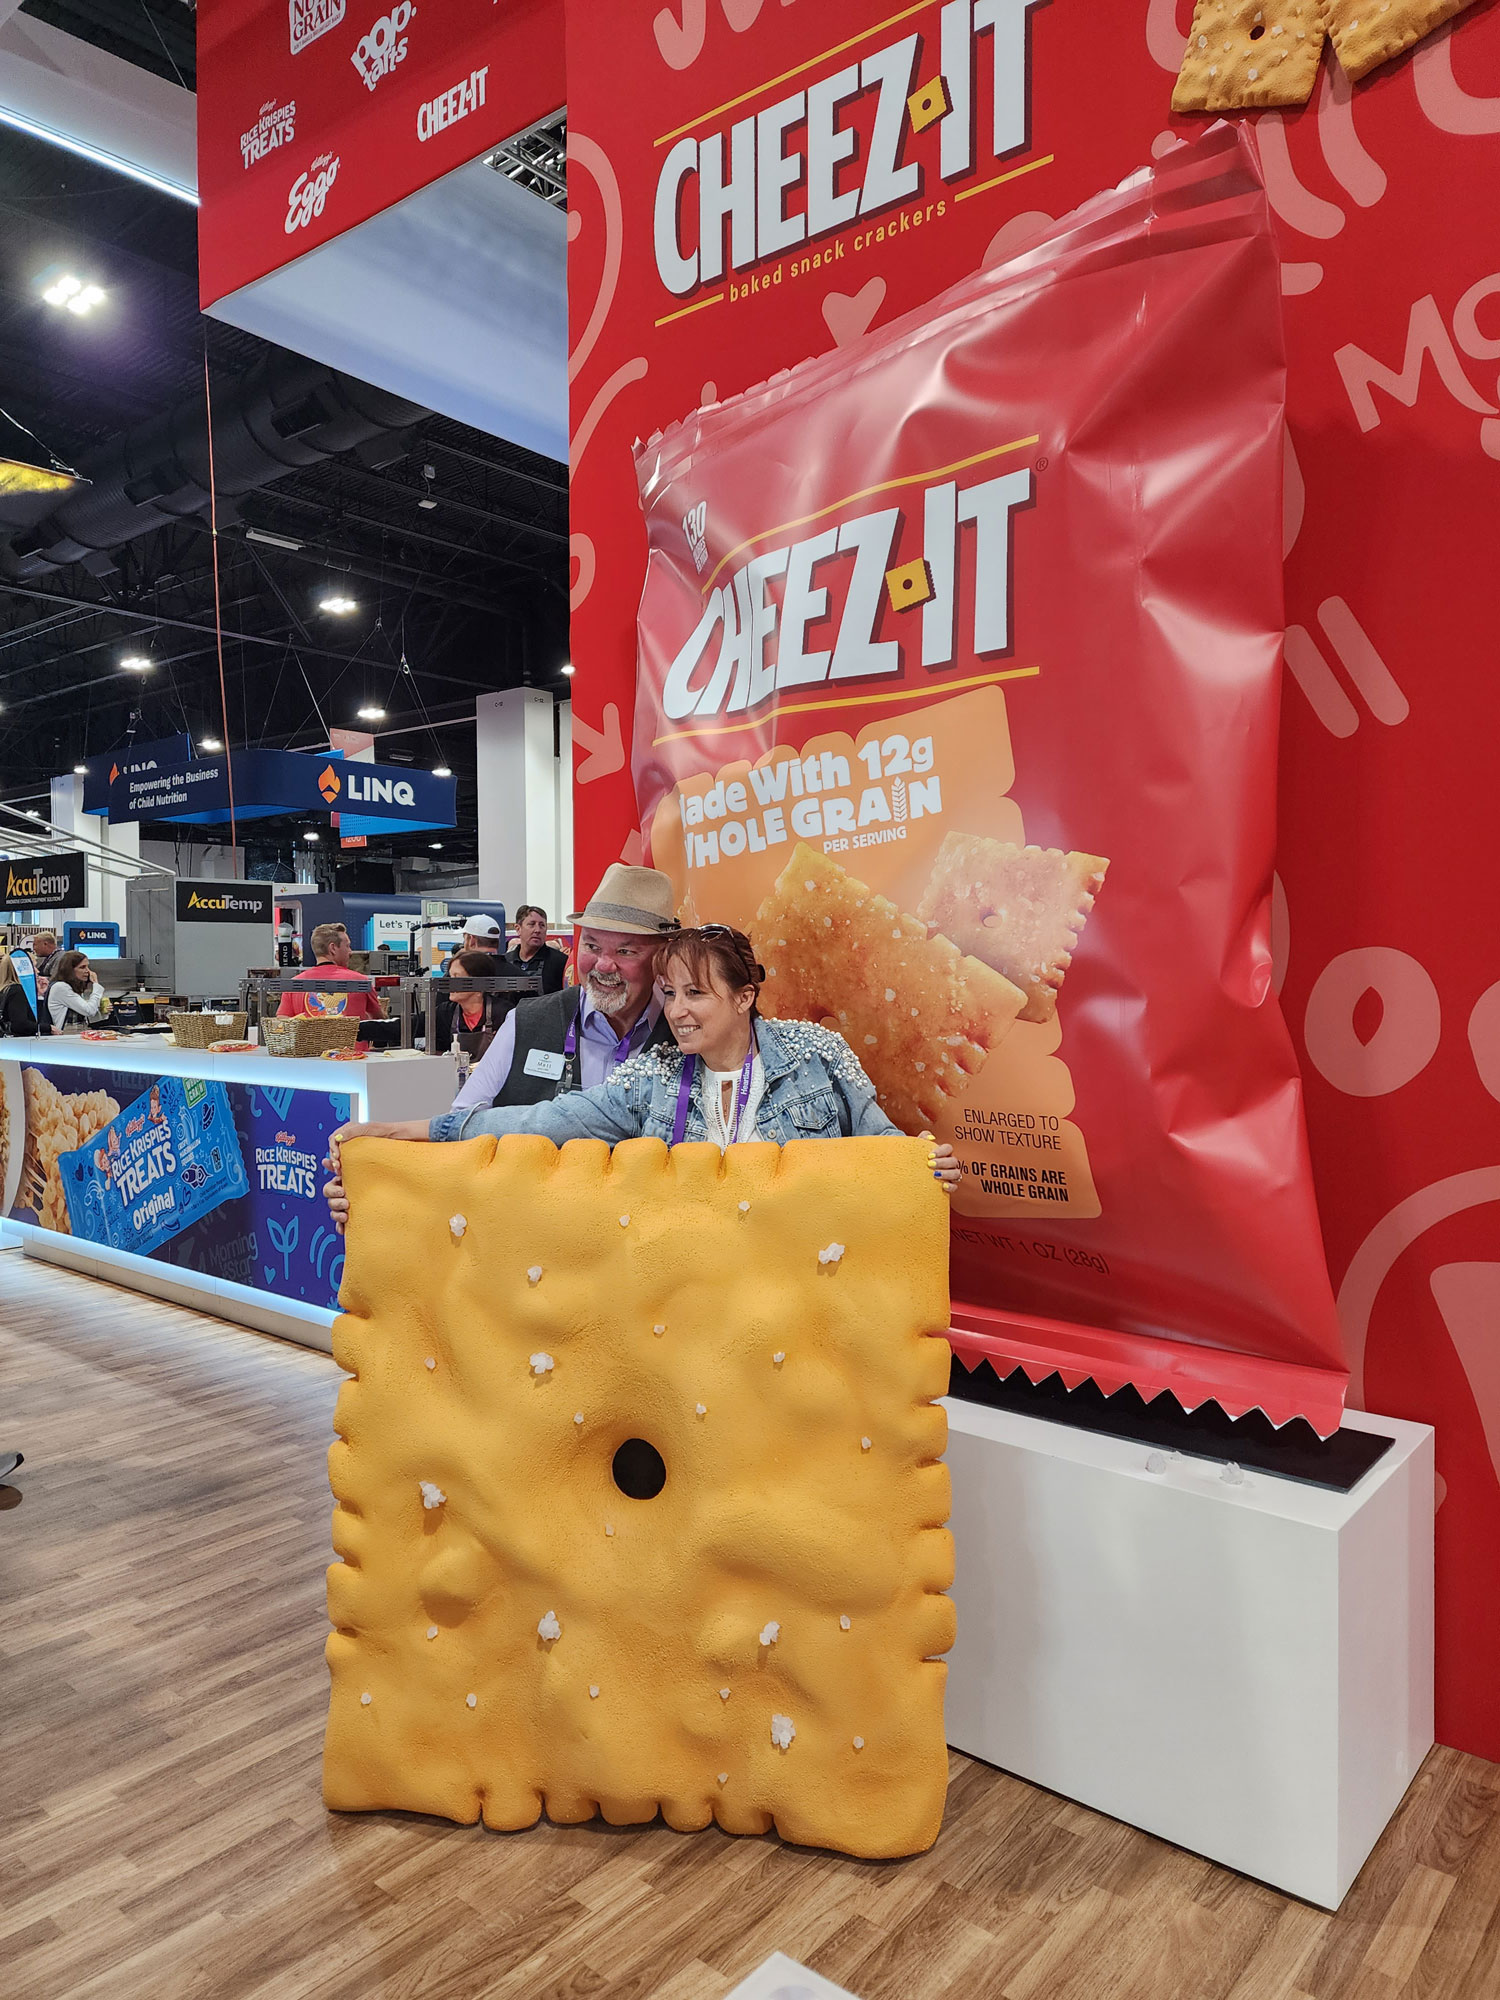 Cheez-It giant product replica